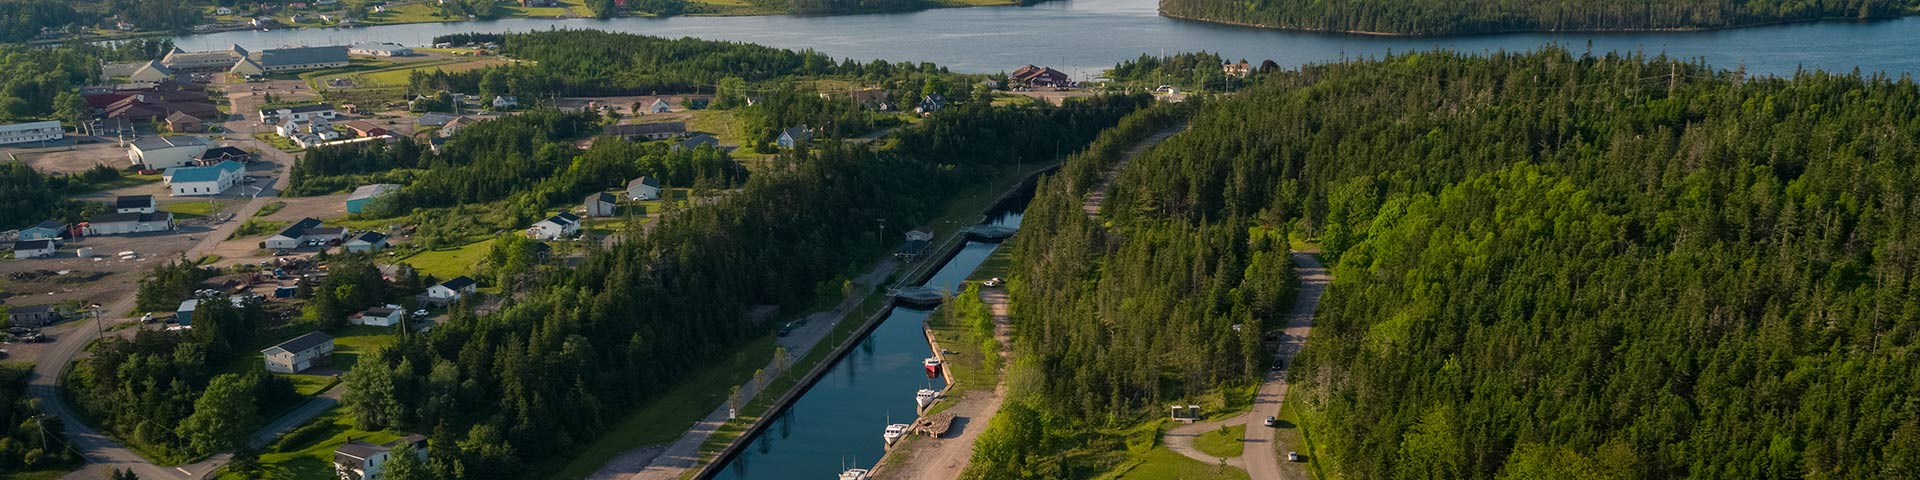 An aerial view of St. Peters Canal and the Bras d'Or Lake